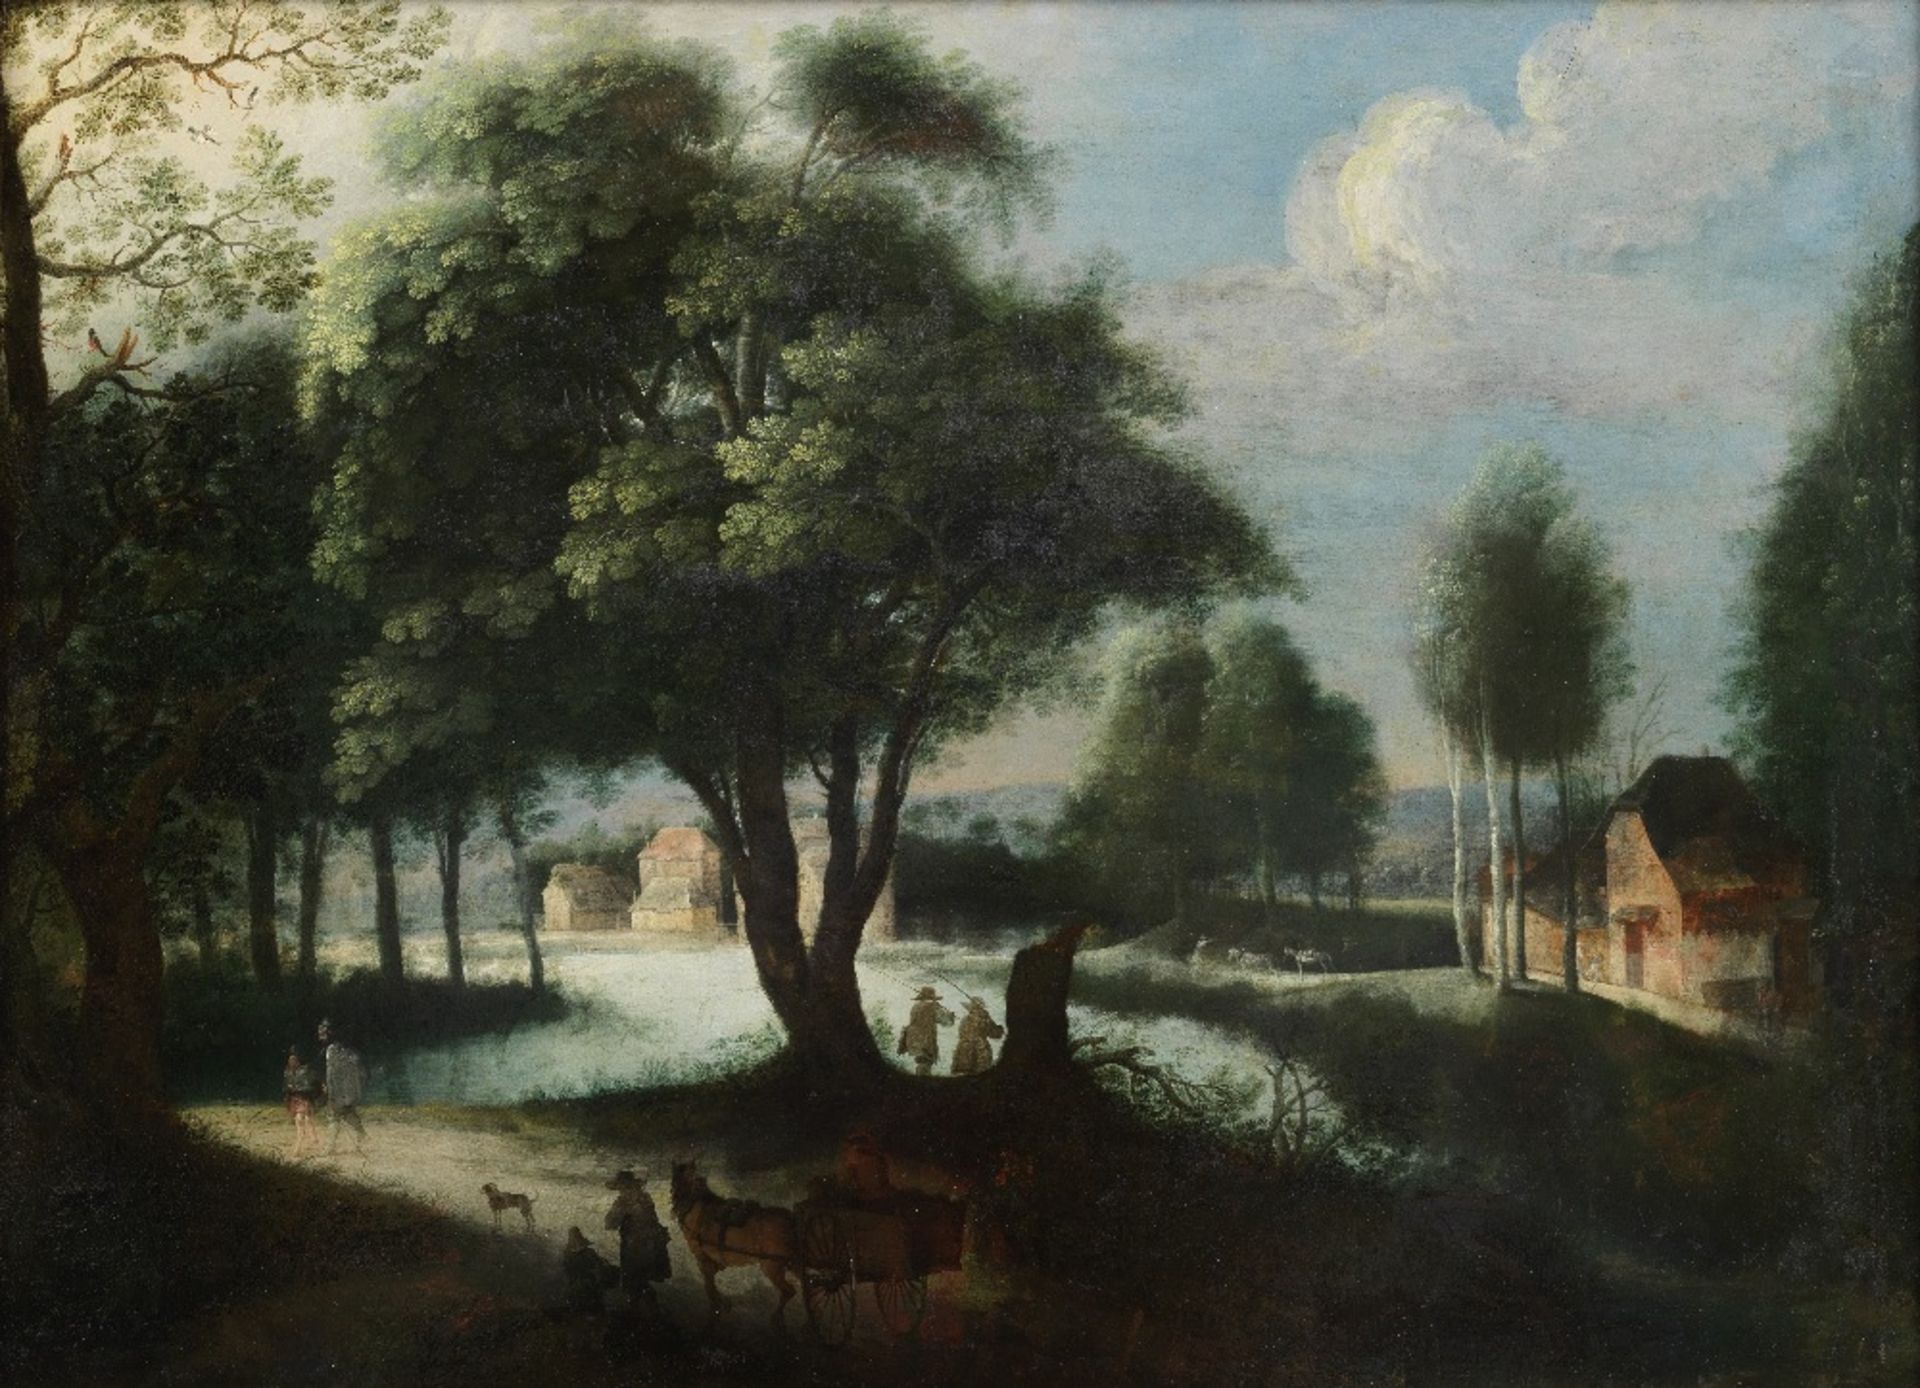 After Adriaen van Stalbemt, 18th Century A river landscape with travellers on a wooded path